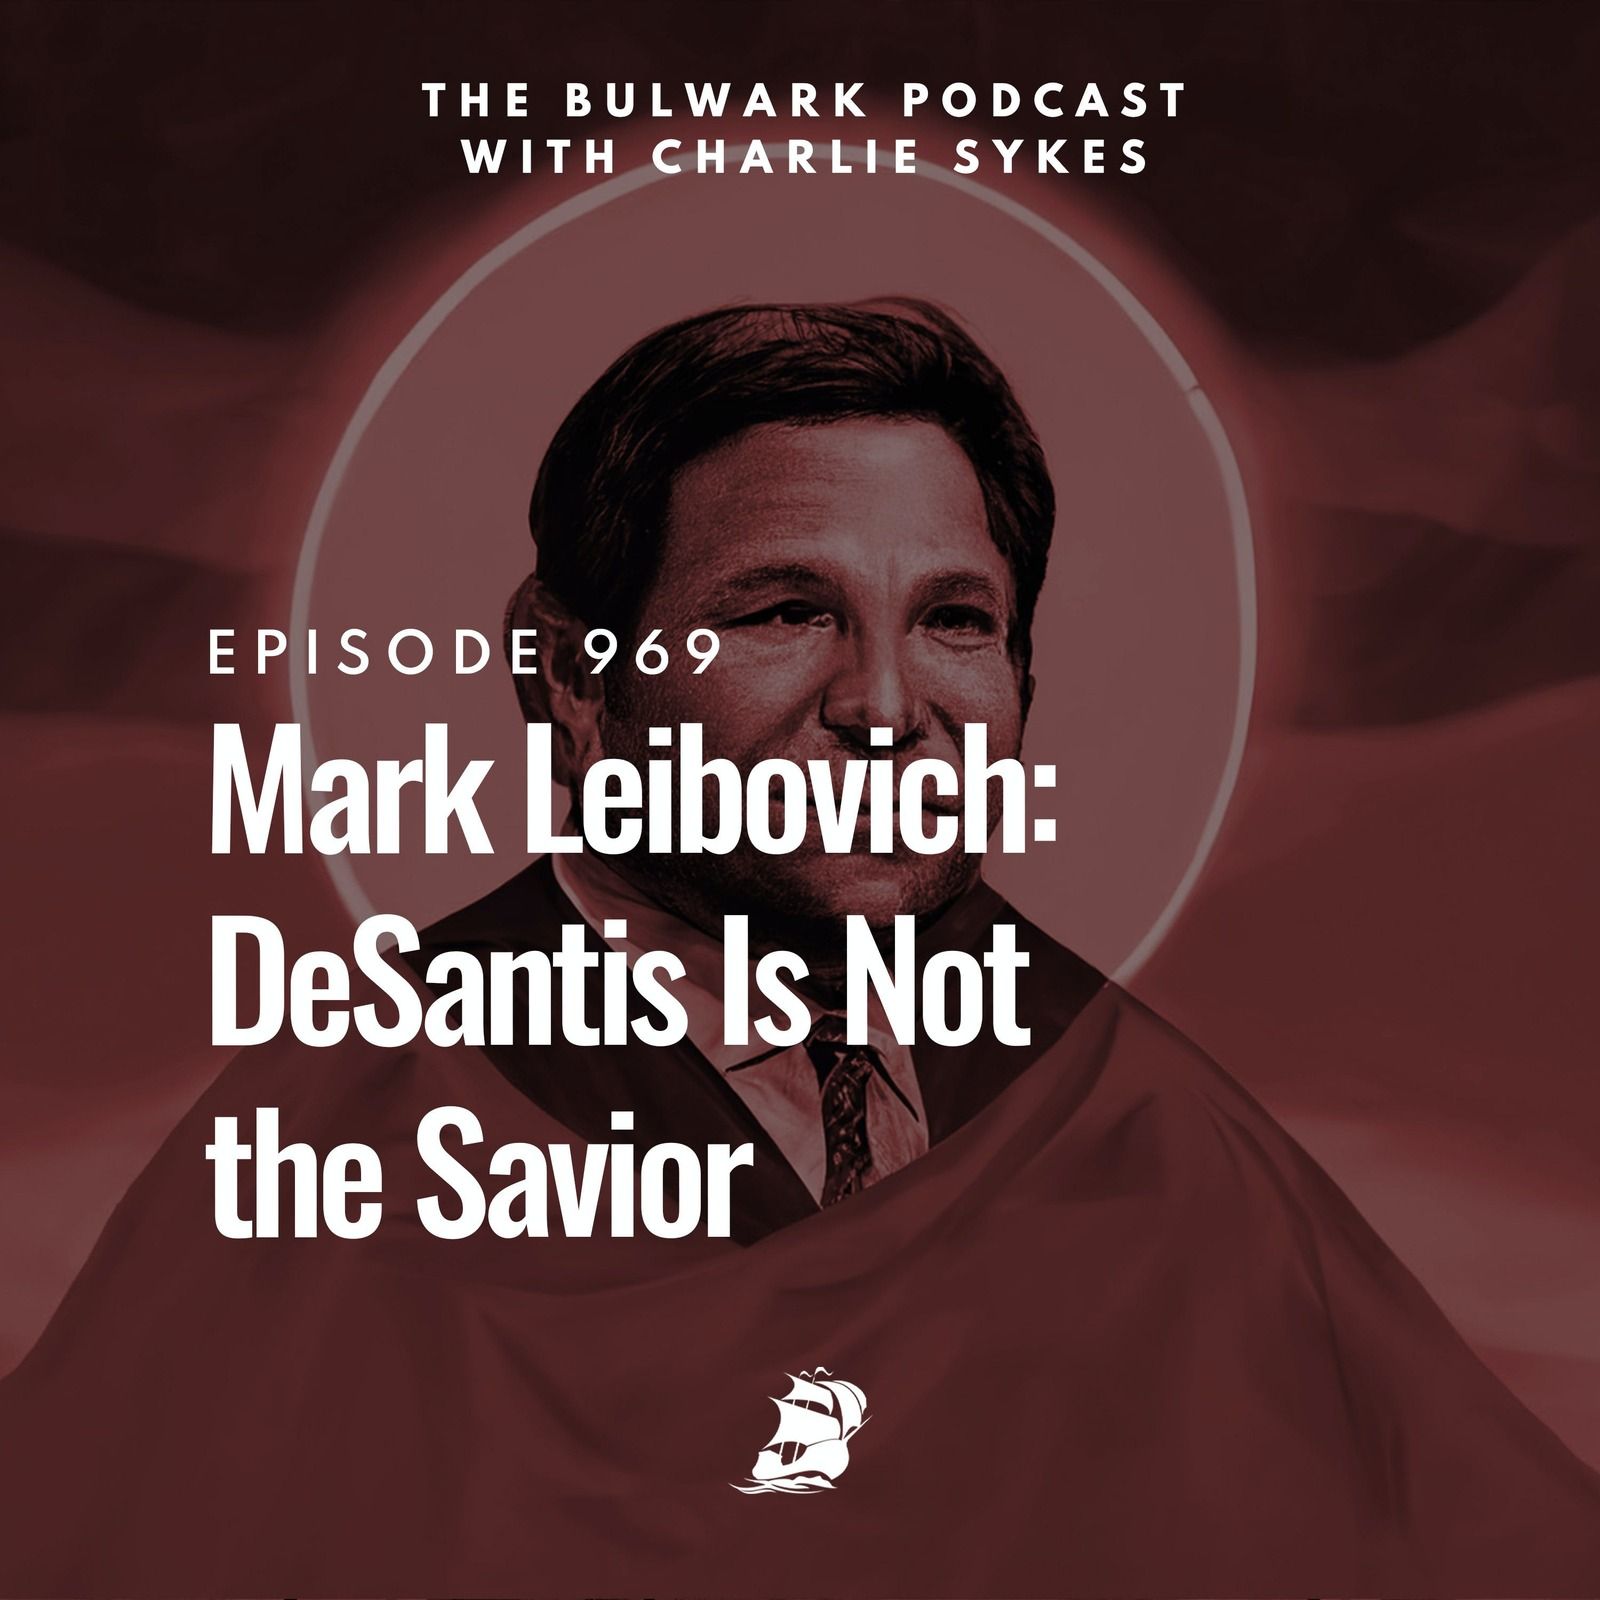 Mark Leibovich: DeSantis Is Not the Savior by The Bulwark Podcast